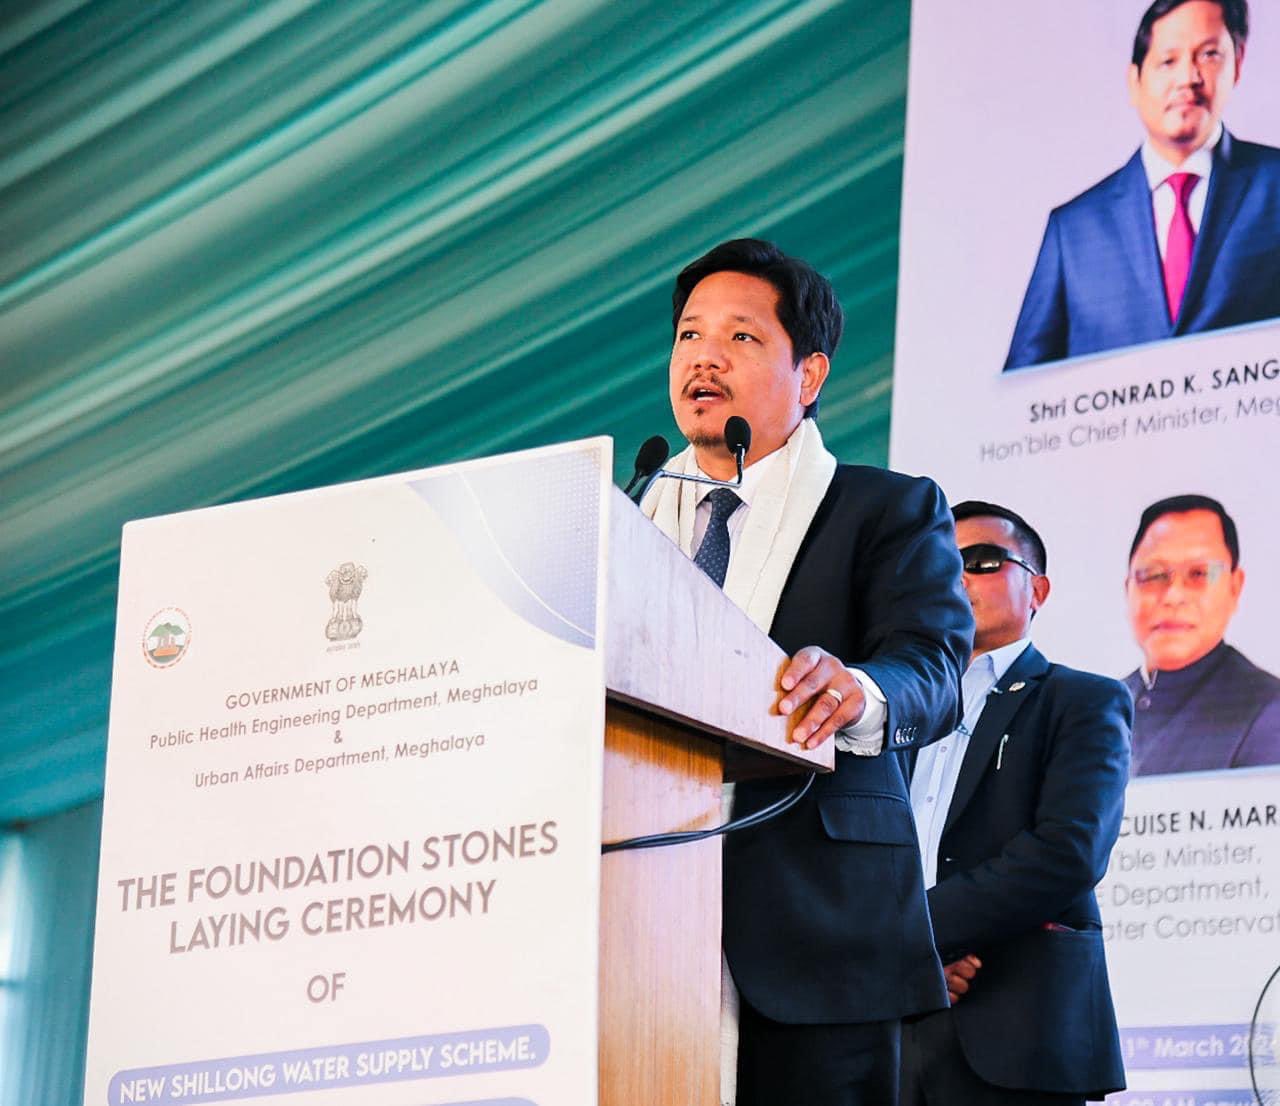 Foundation for New Shillong water scheme among 3 projects laid by CM